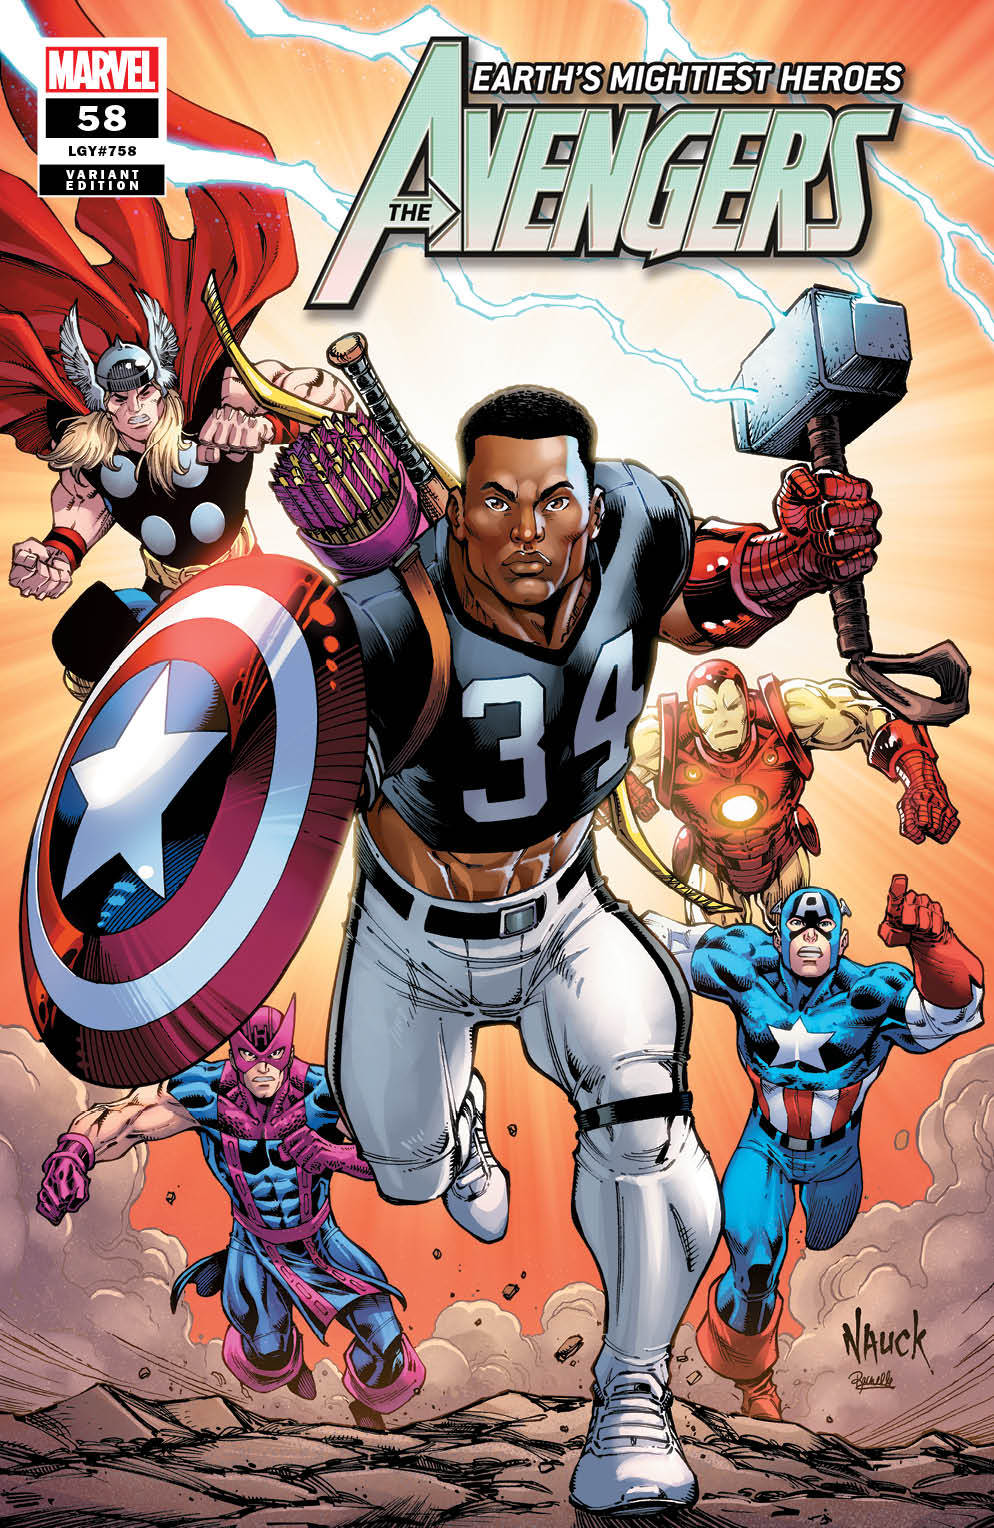 FORMER MULTI-SPORT SUPERSTAR BO JACKSON AND MARVEL'S AVENGERS SPRING INTO  ACTION ON EXCLUSIVE VARIANT COVER CELEBRATING AVENGERS #58 COMIC BOOK  RELEASE – FIRST COMICS NEWS